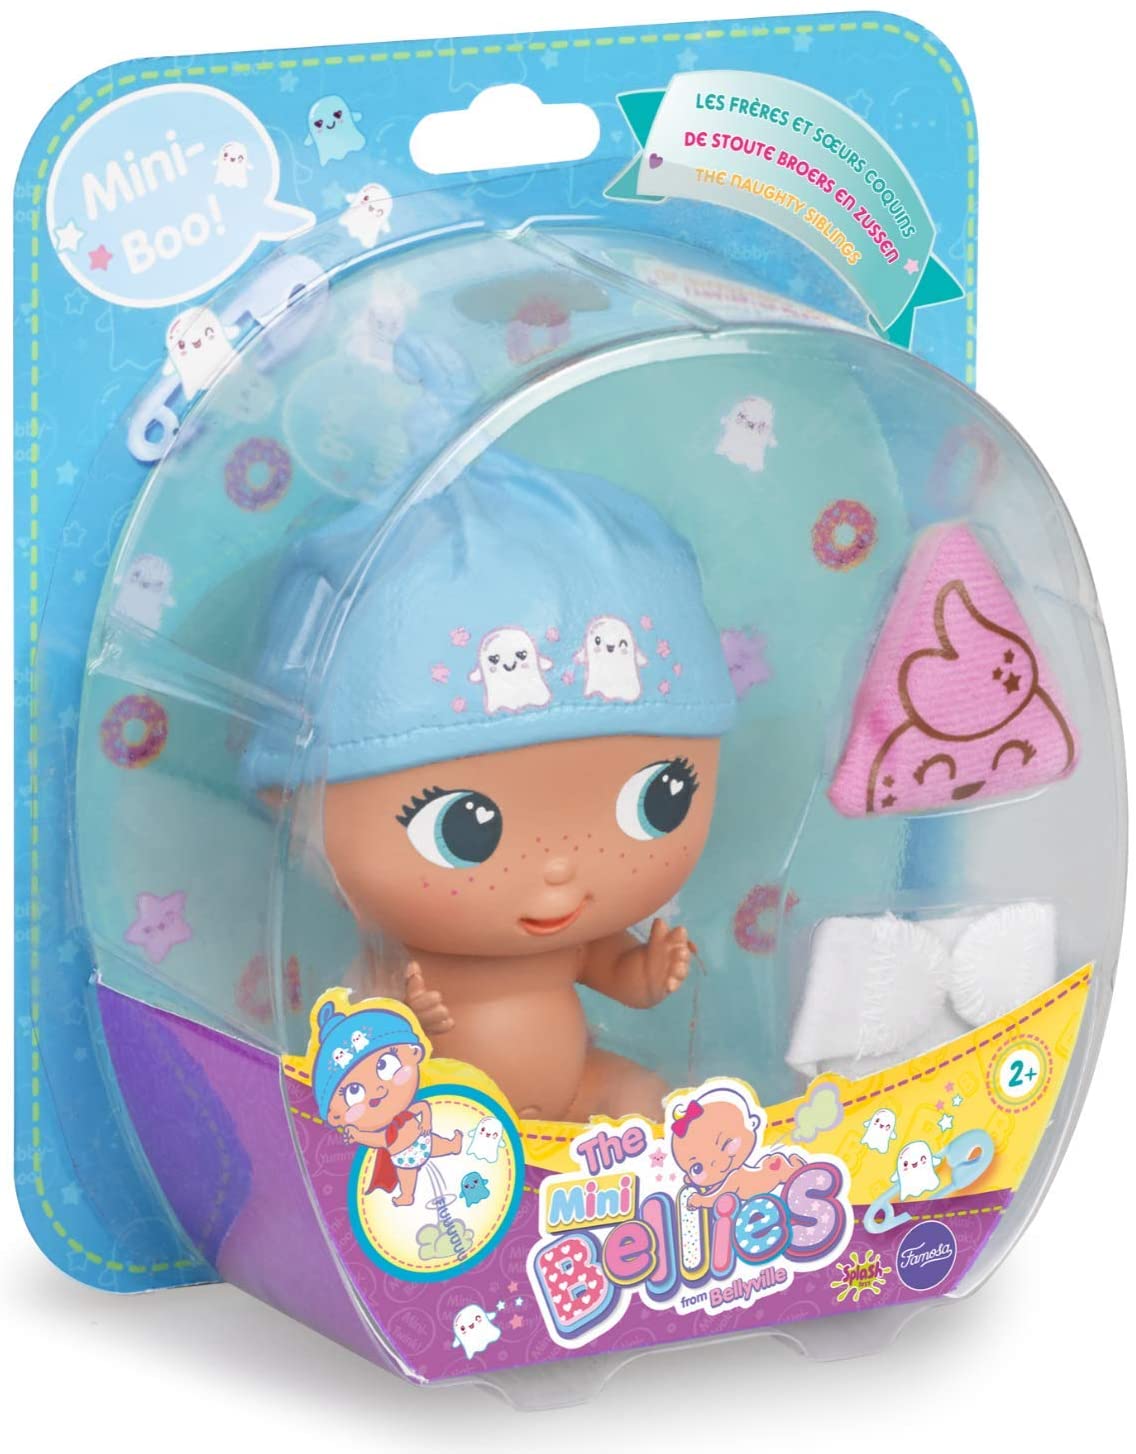 GTBW  Mini Bellies Doll: The adorable Bellies Babies are now waiting to meet the kids with their Mini babies - 700014789